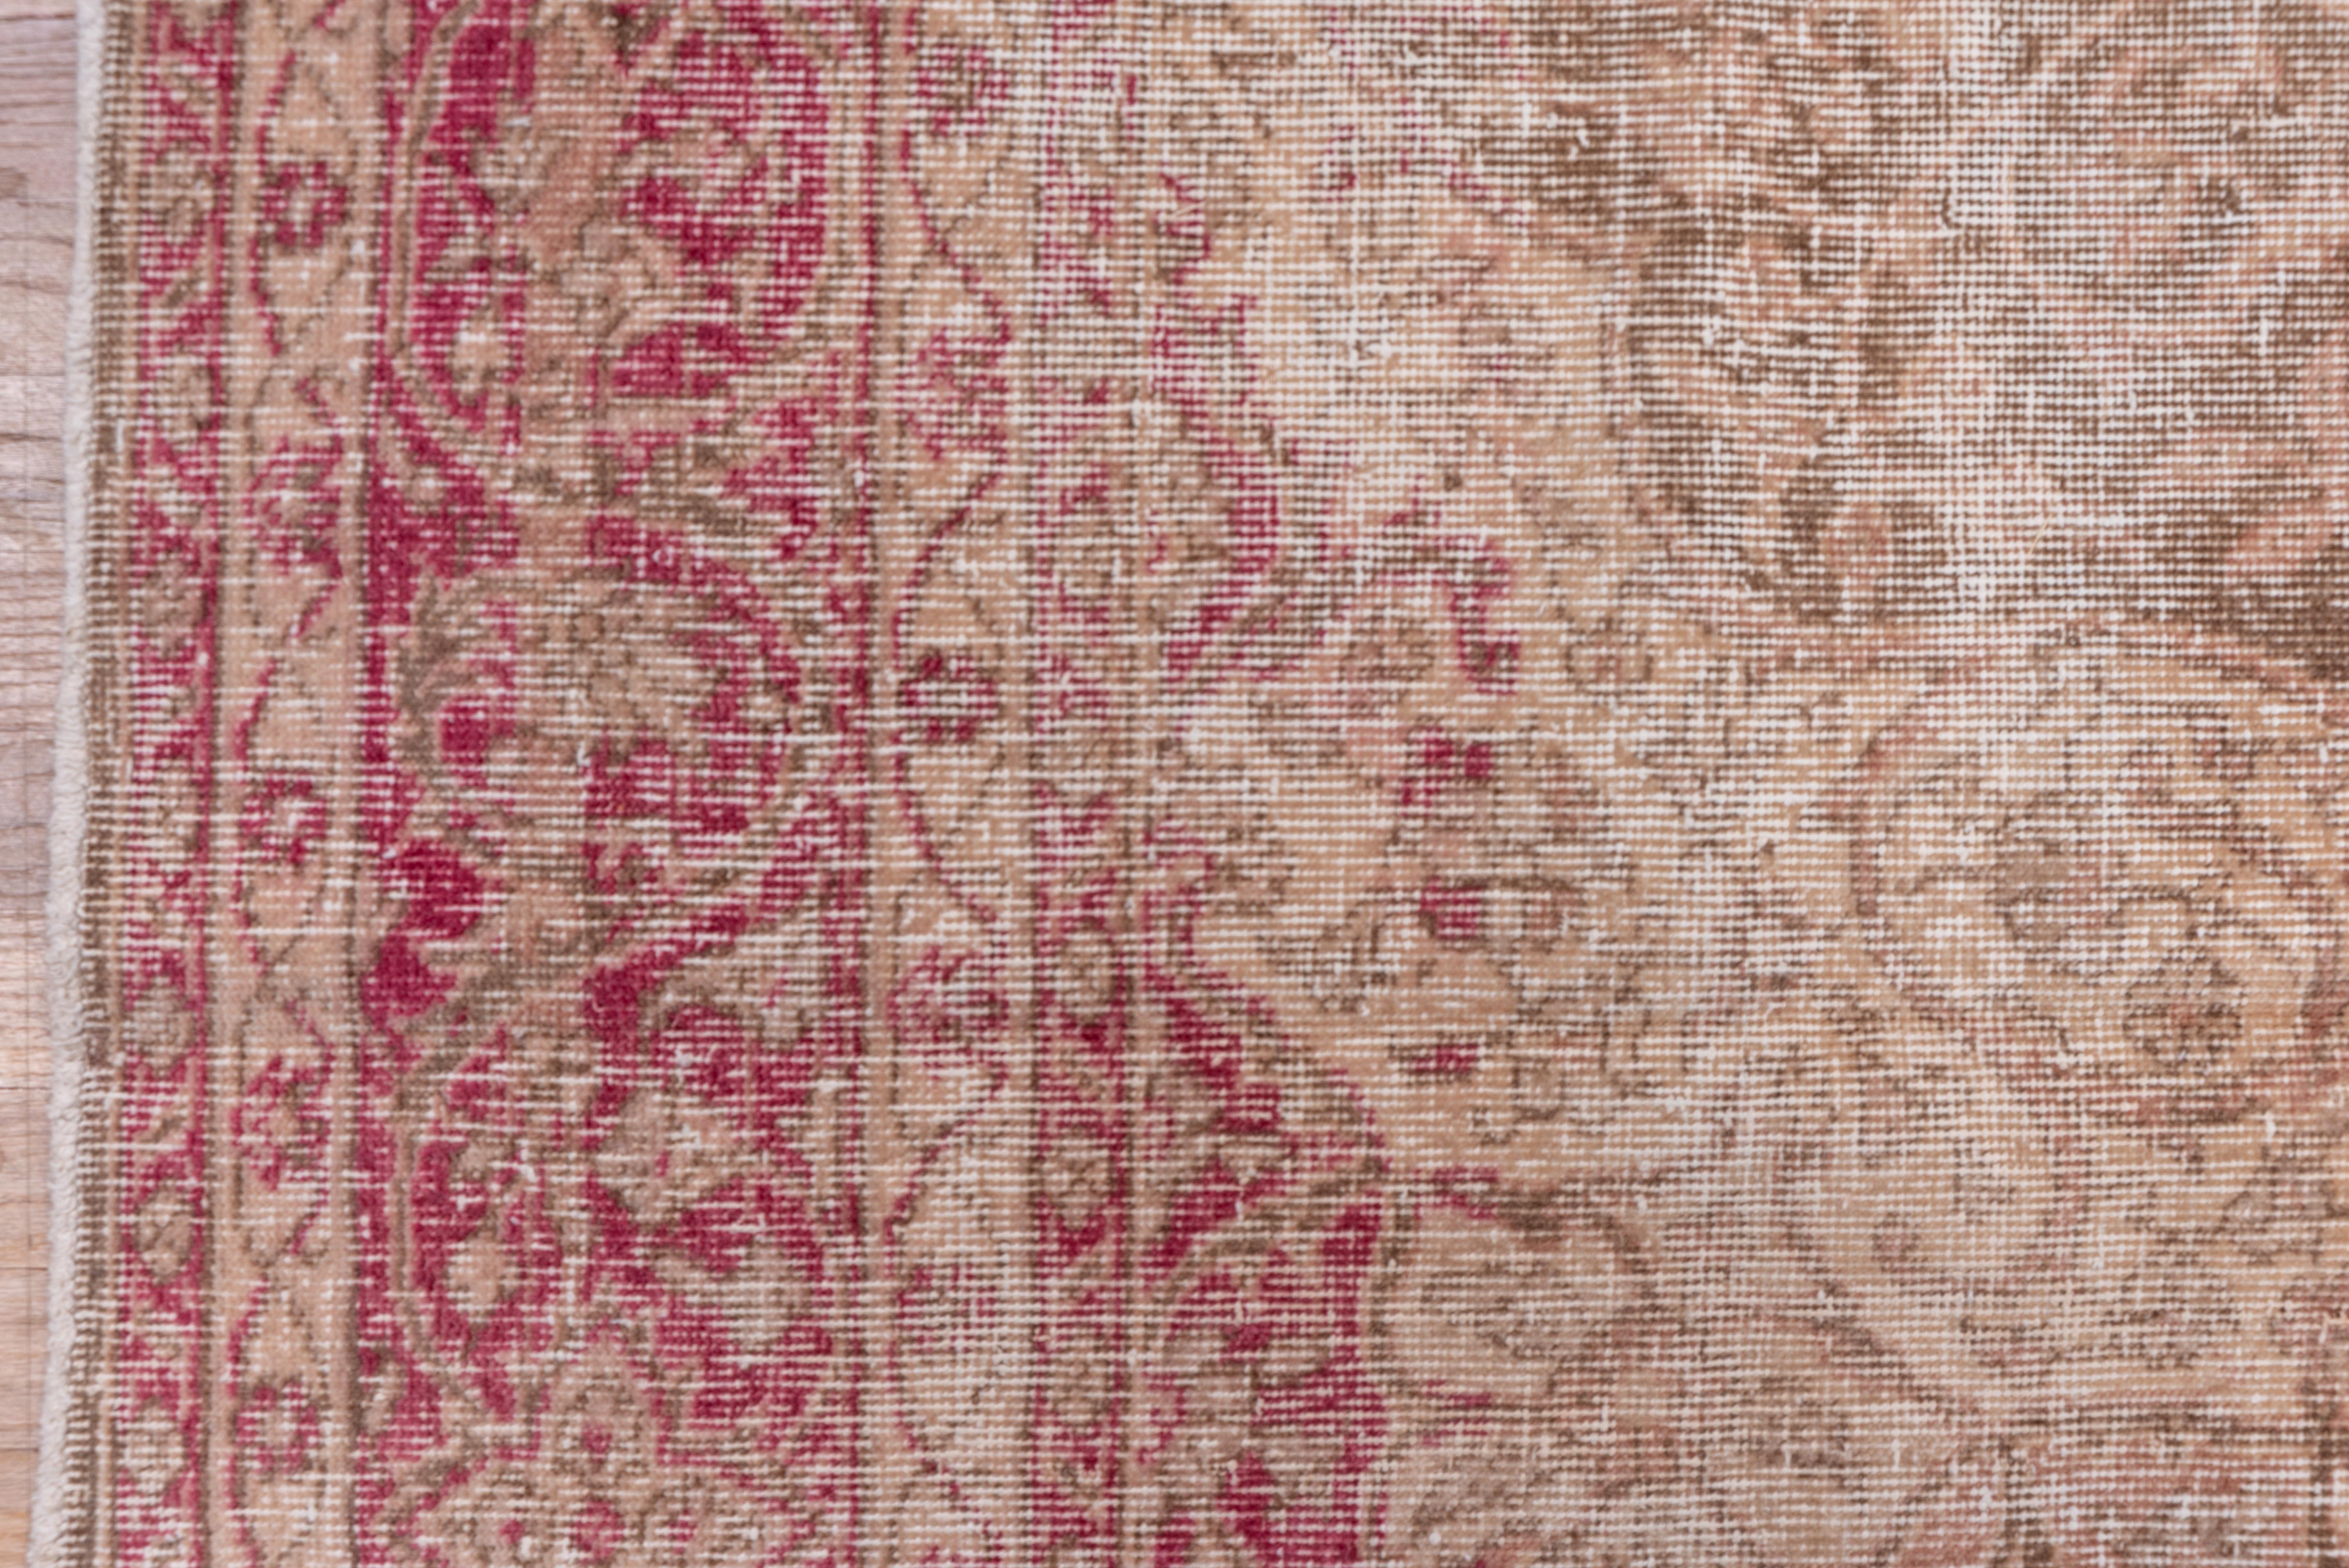 Like many of our rugs, this Oushak tells a story. Decades have come and gone but this rug remains, nearly 100 years since being knotted together. A former bright clean red has been fantastically overdyed with a rustic orange/red dye, this medallion